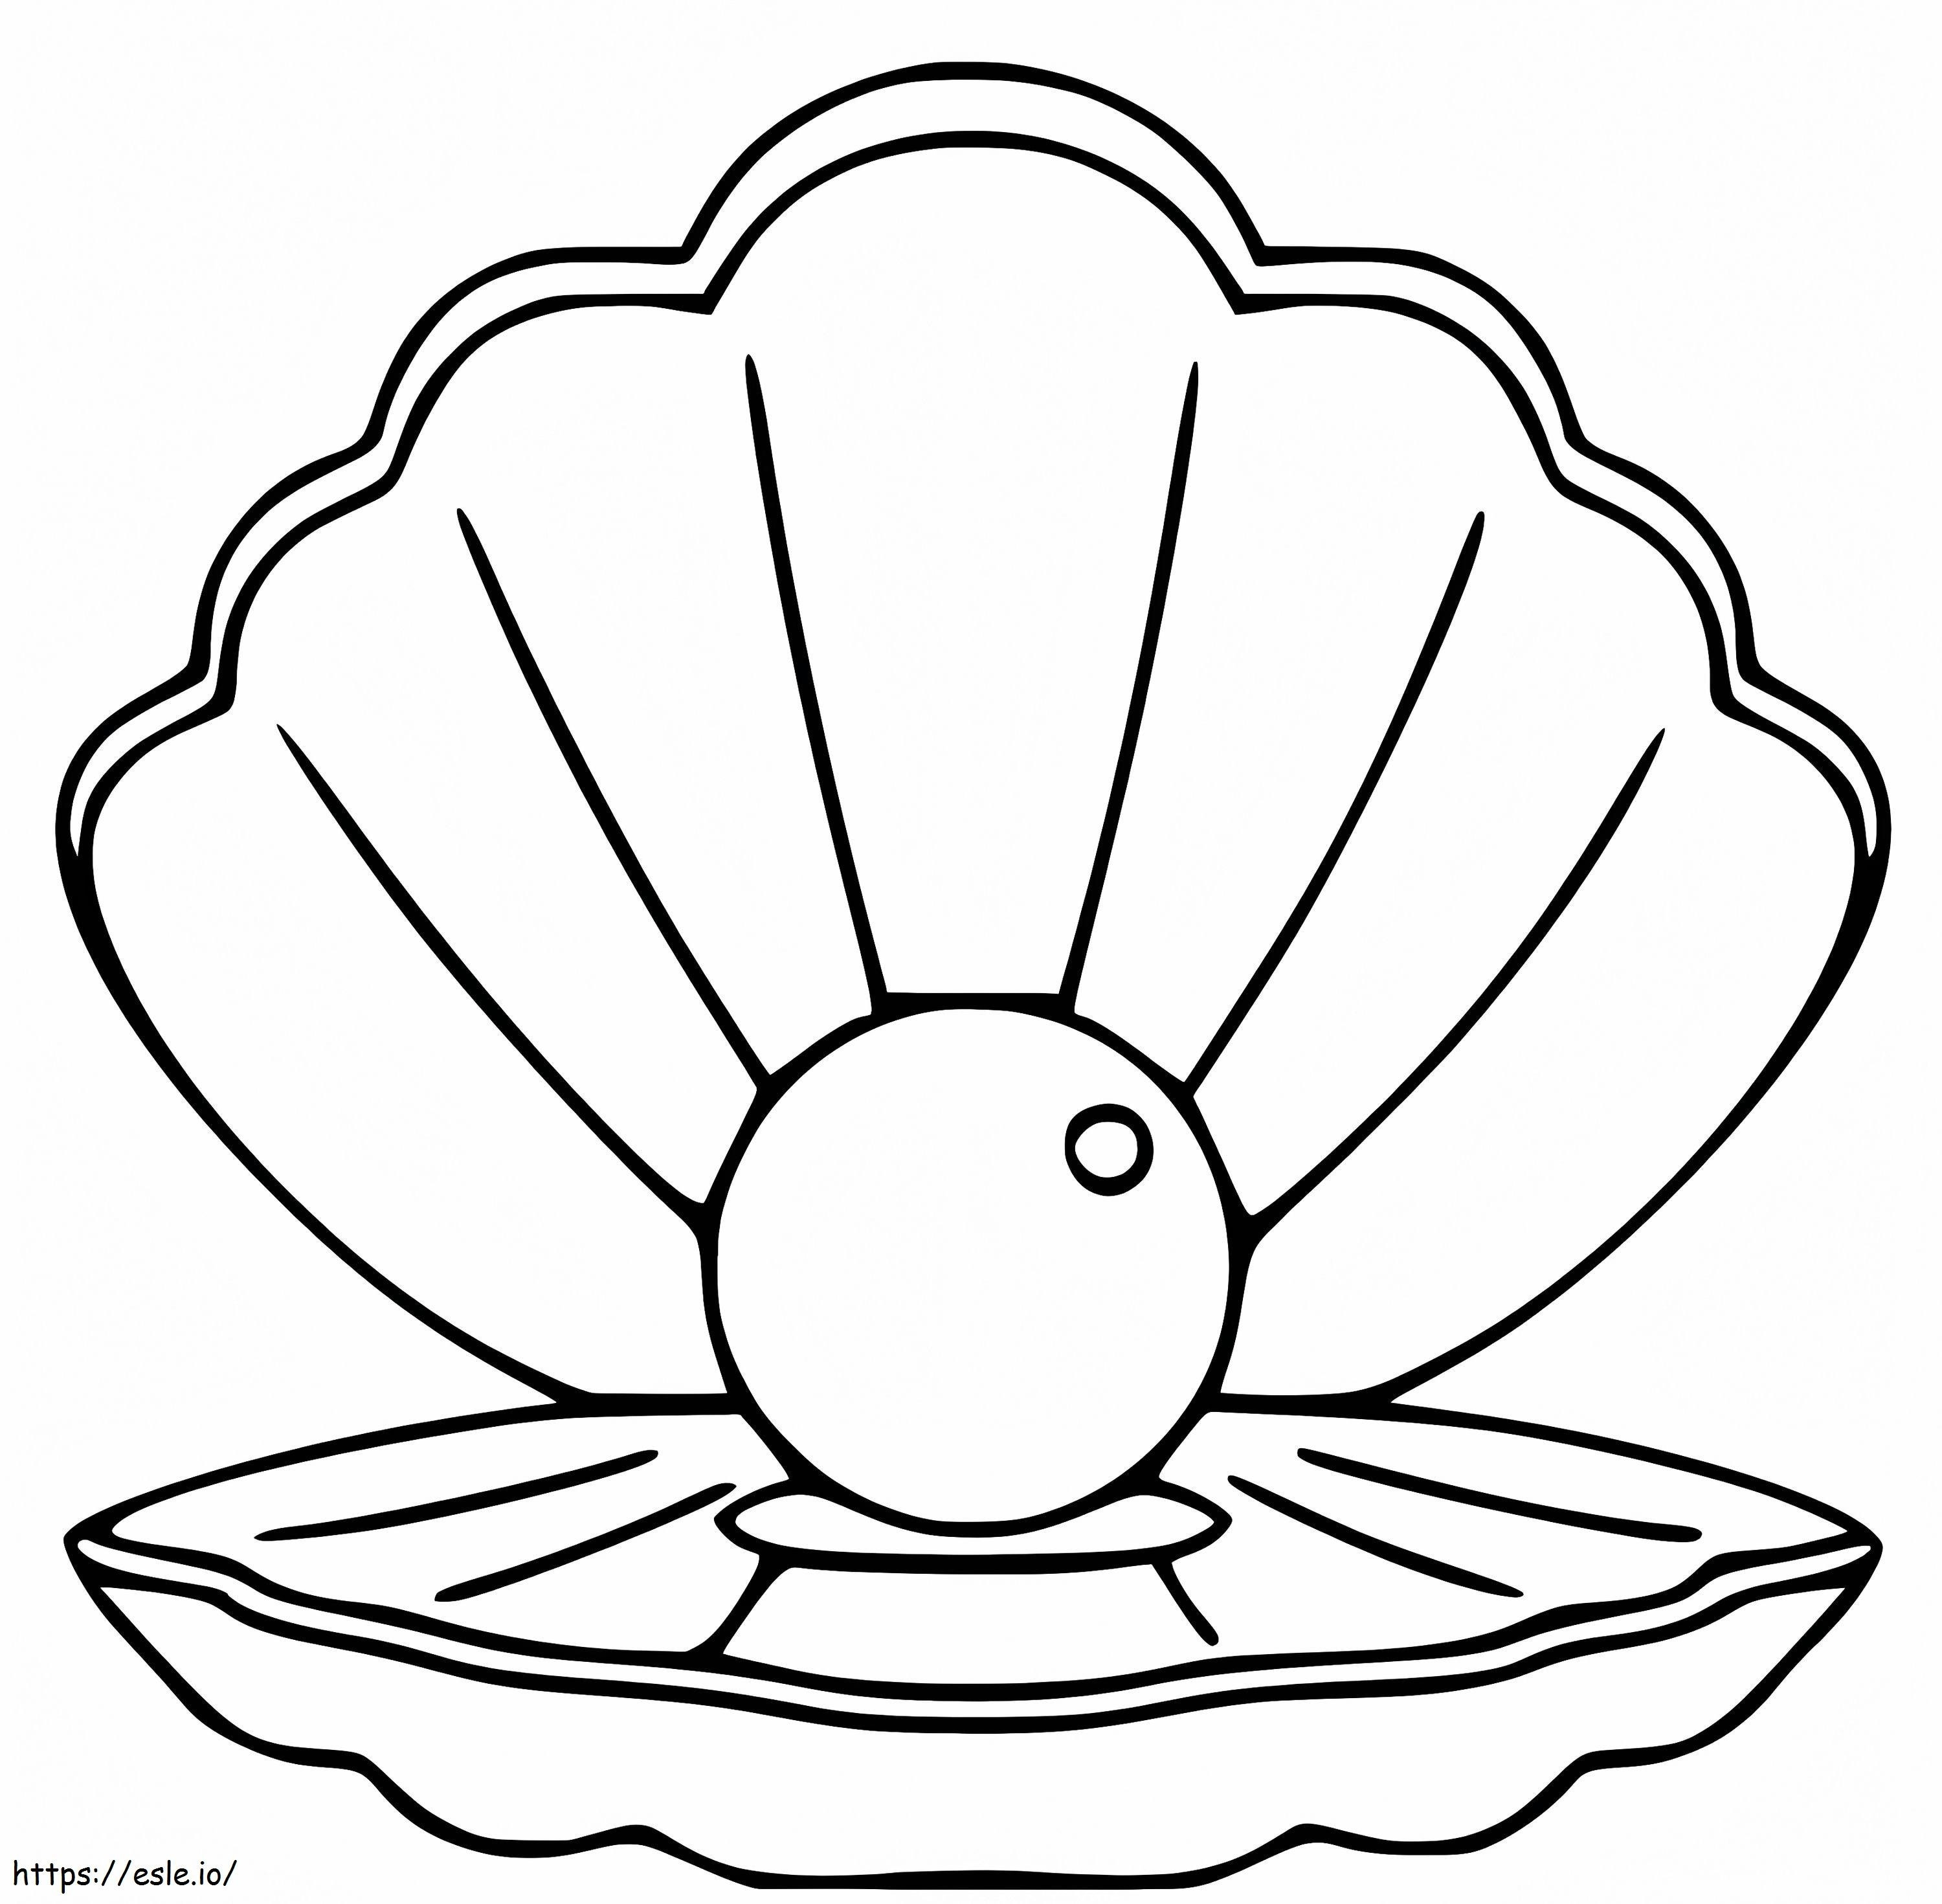 Normal Scallop coloring page